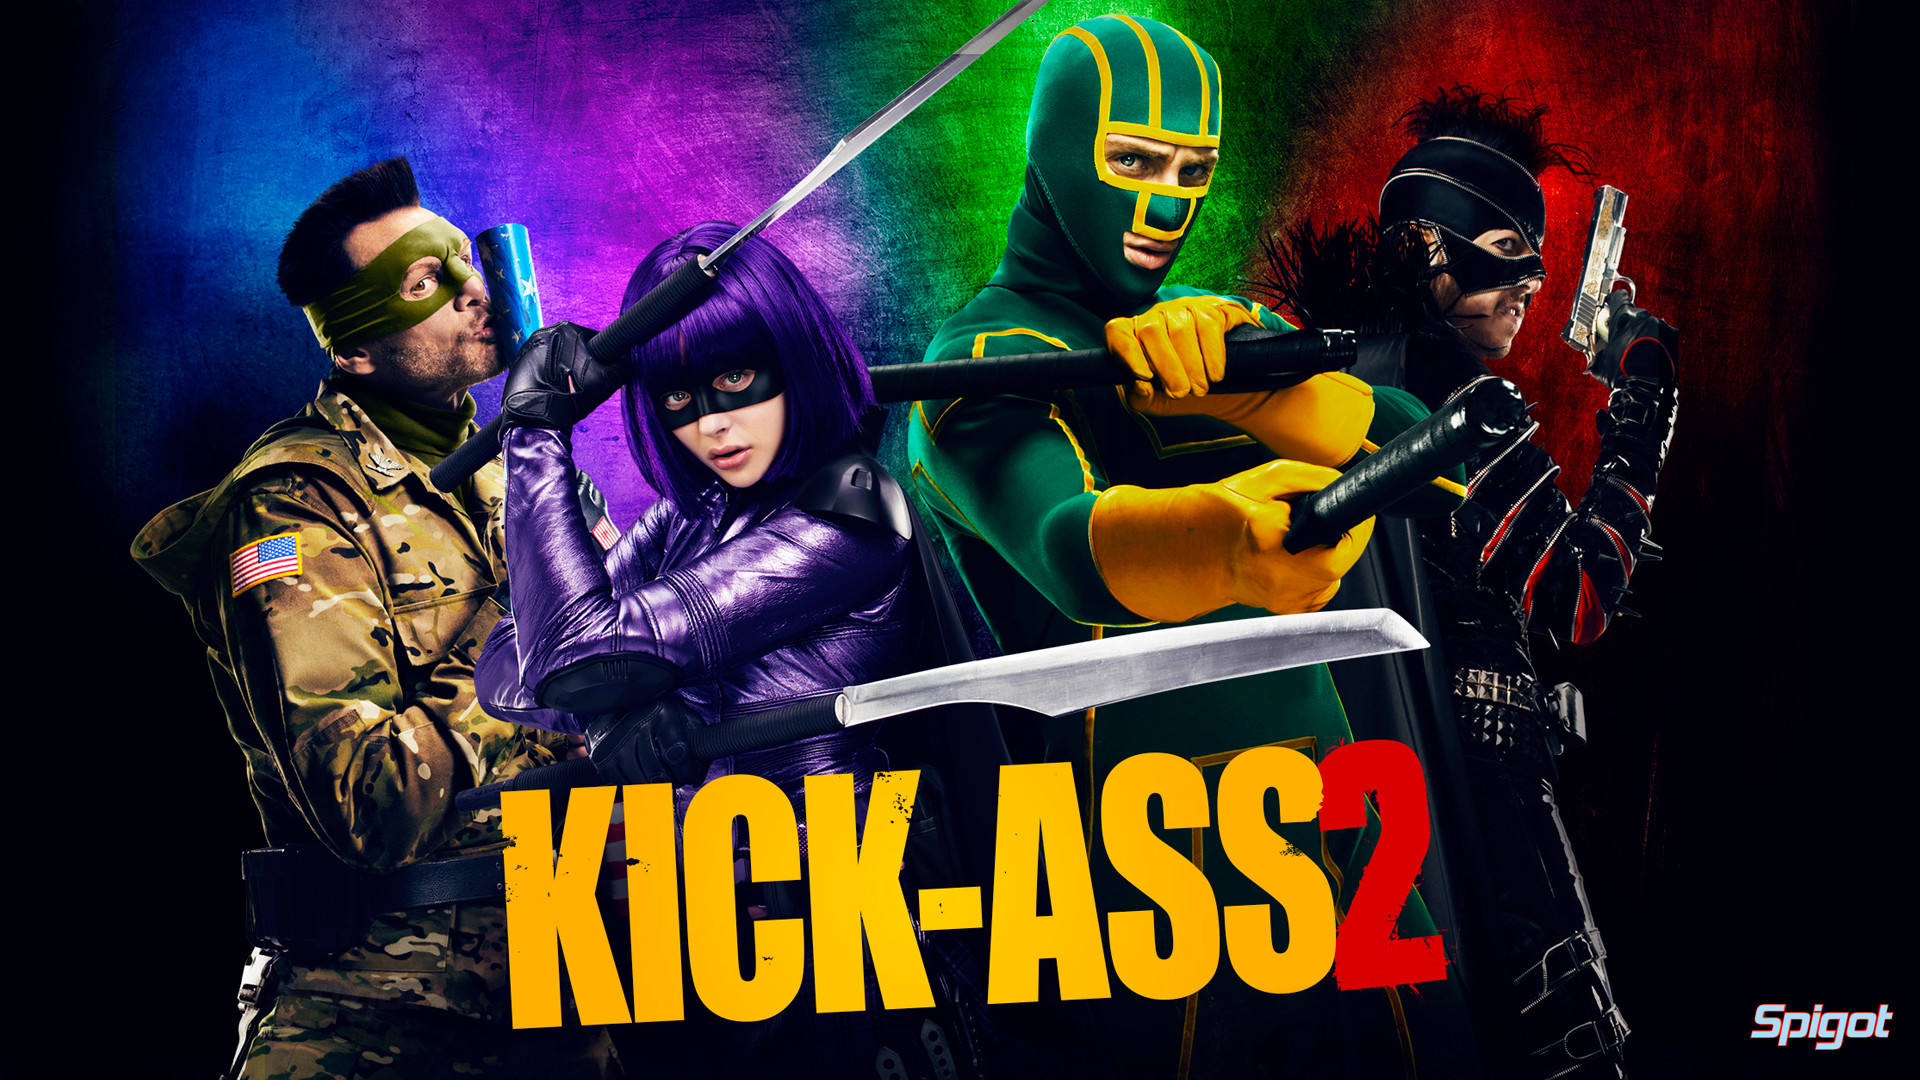 1920x1080 Here are some wallpapers from the awesome movie Kick-Ass 2 requested by  Smithy, the wallpapers feature,